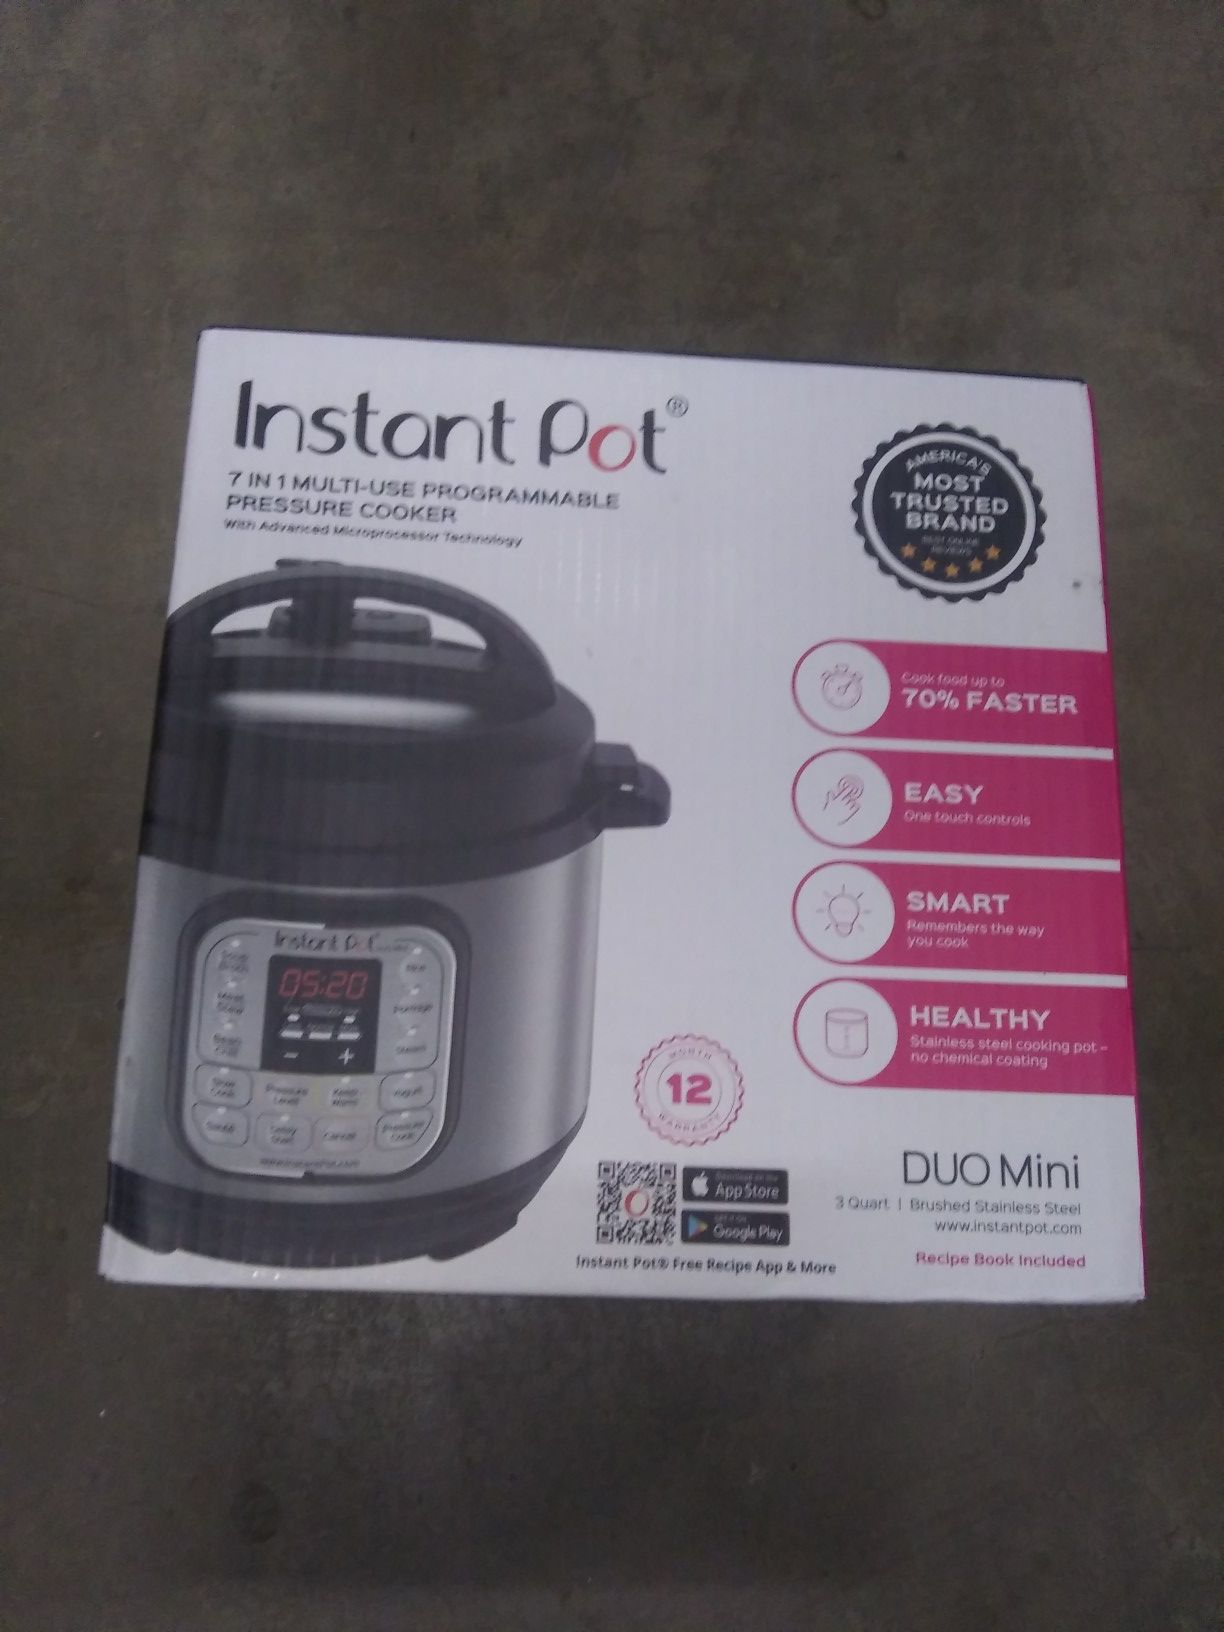 Instant Pot Duo Mini 3 Qt 7-in-1 Multi-Use Programmable Pressure Cooker, Slow Cooker, Rice Cooker, Steamer, Sauté, Yogurt Maker and Warmer